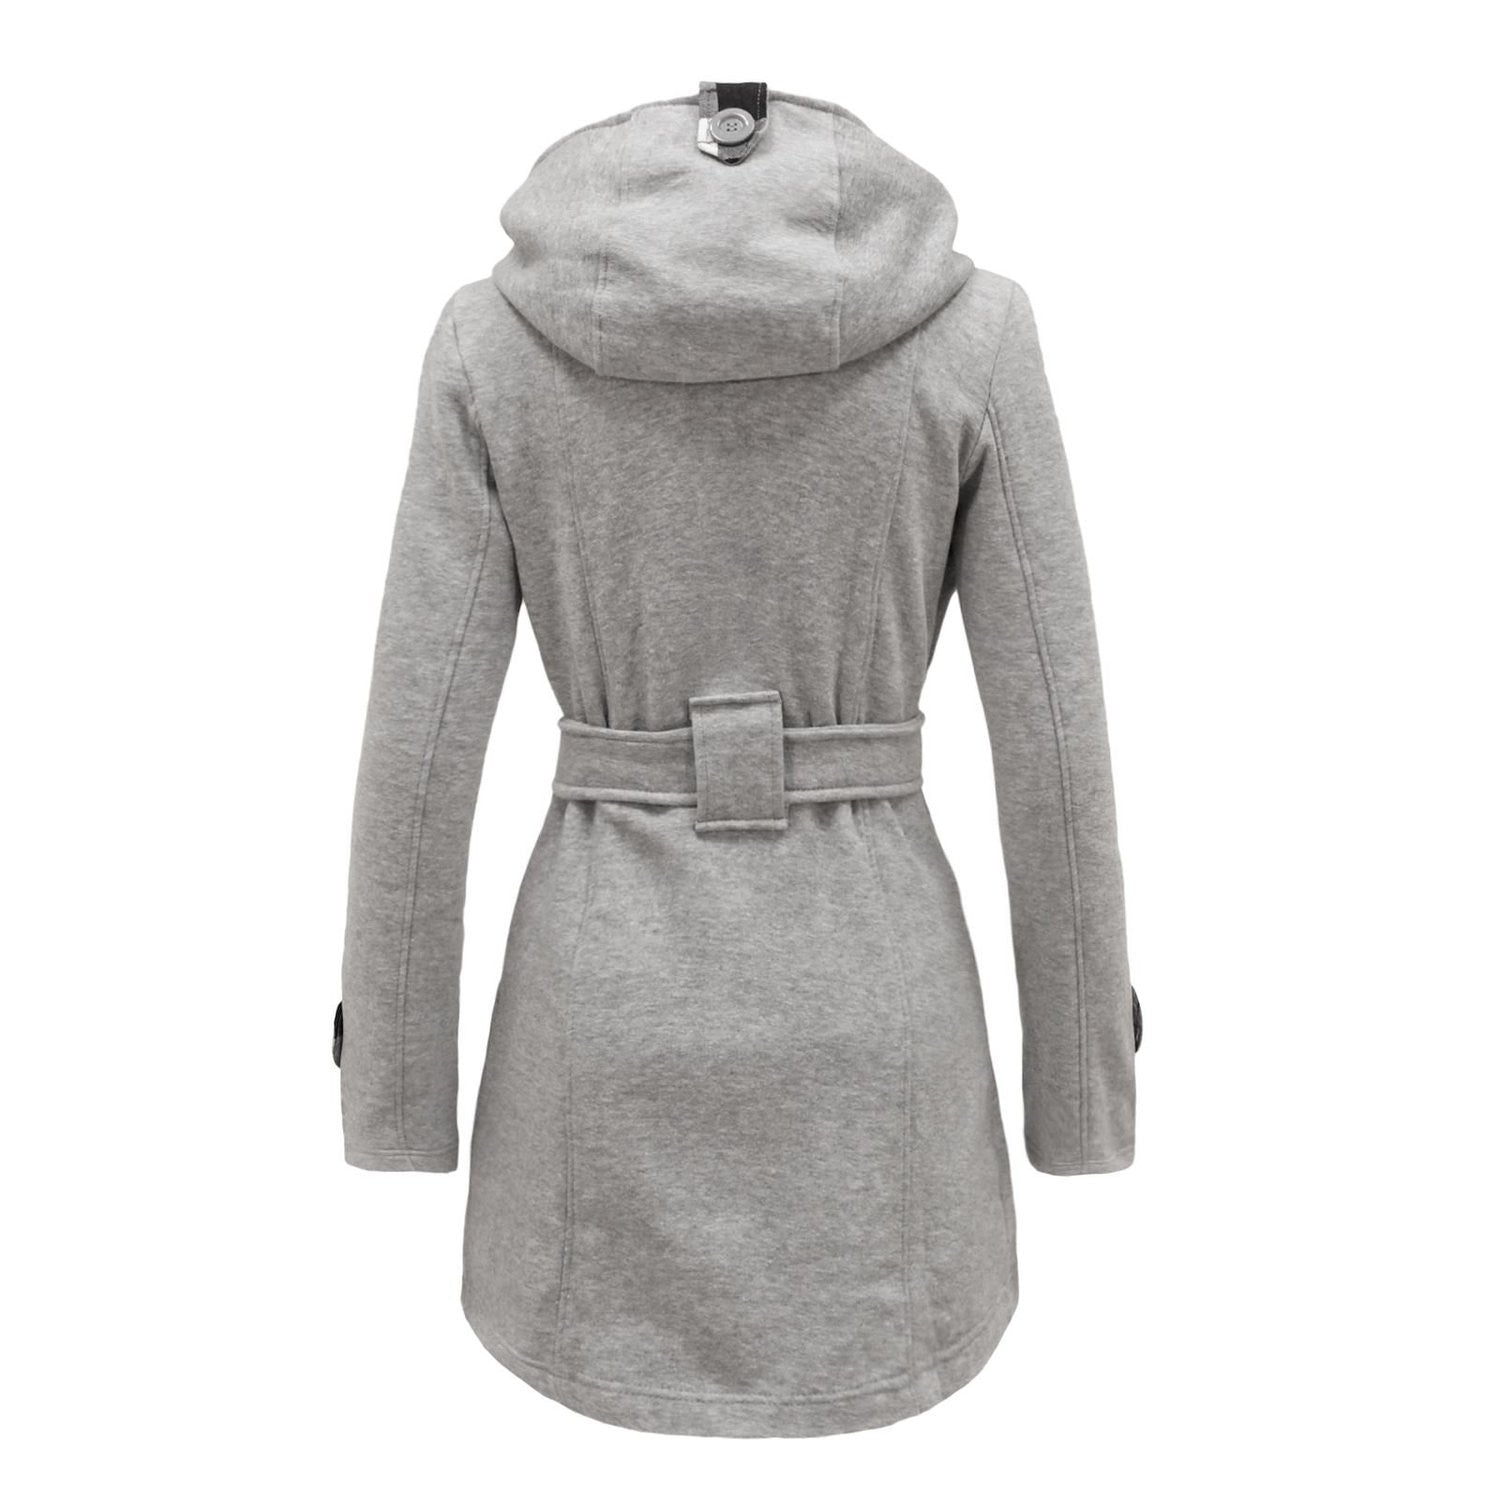 Plus Size Double Breasted Long with Belt Hooded Coat - MeetYoursFashion - 10